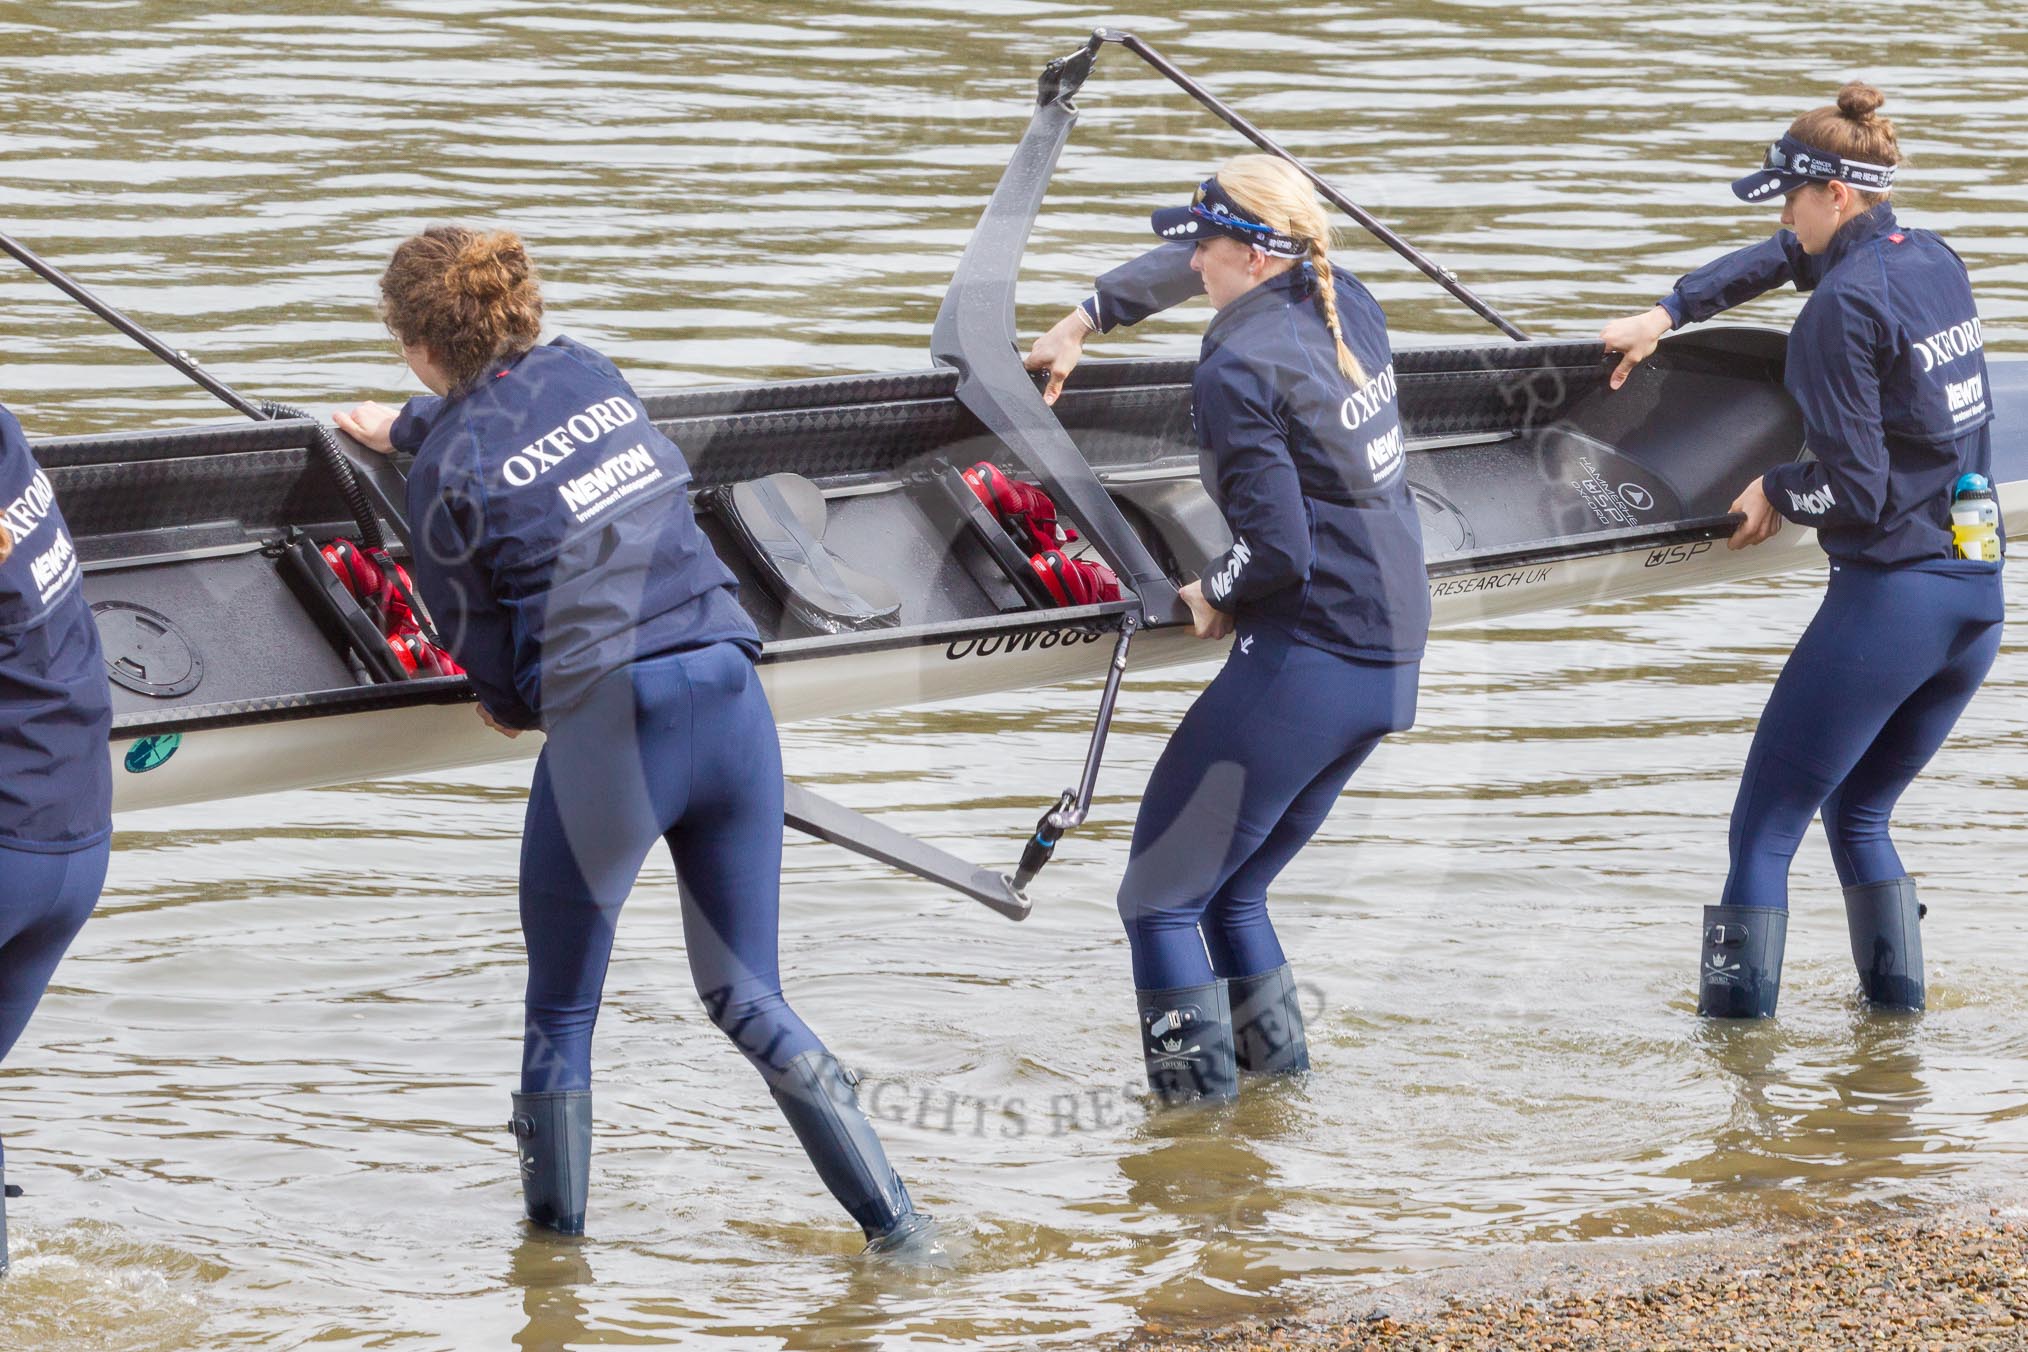 The Boat Race season 2016 -  The Cancer Research Women's Boat Race.
River Thames between Putney Bridge and Mortlake,
London SW15,

United Kingdom,
on 27 March 2016 at 13:22, image #86